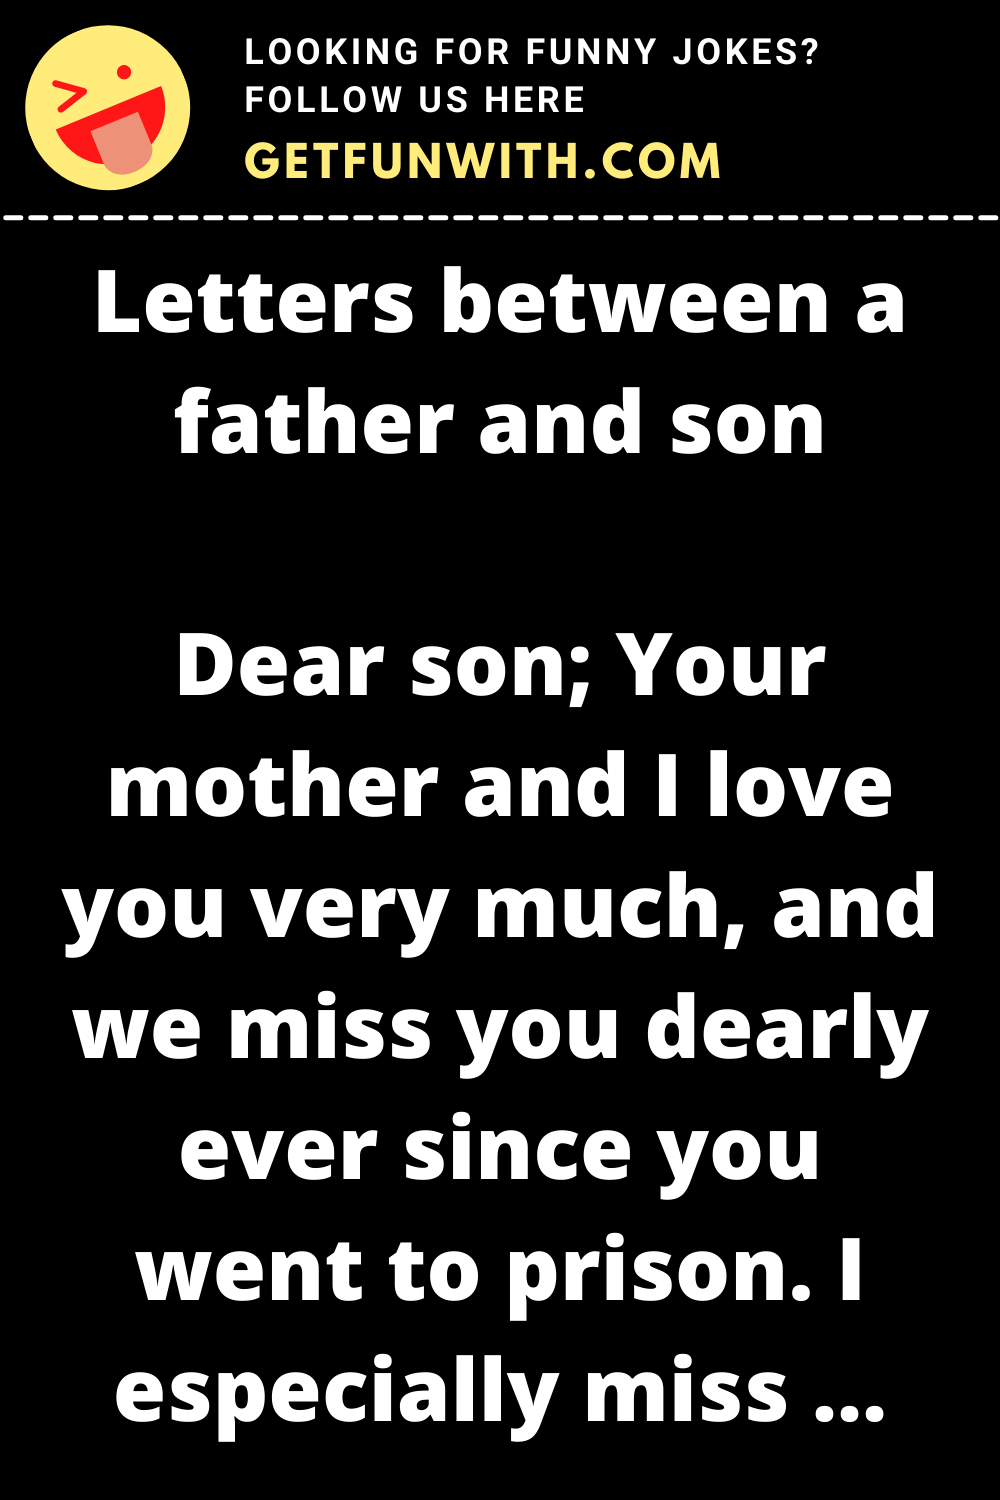 Letters between a father and son